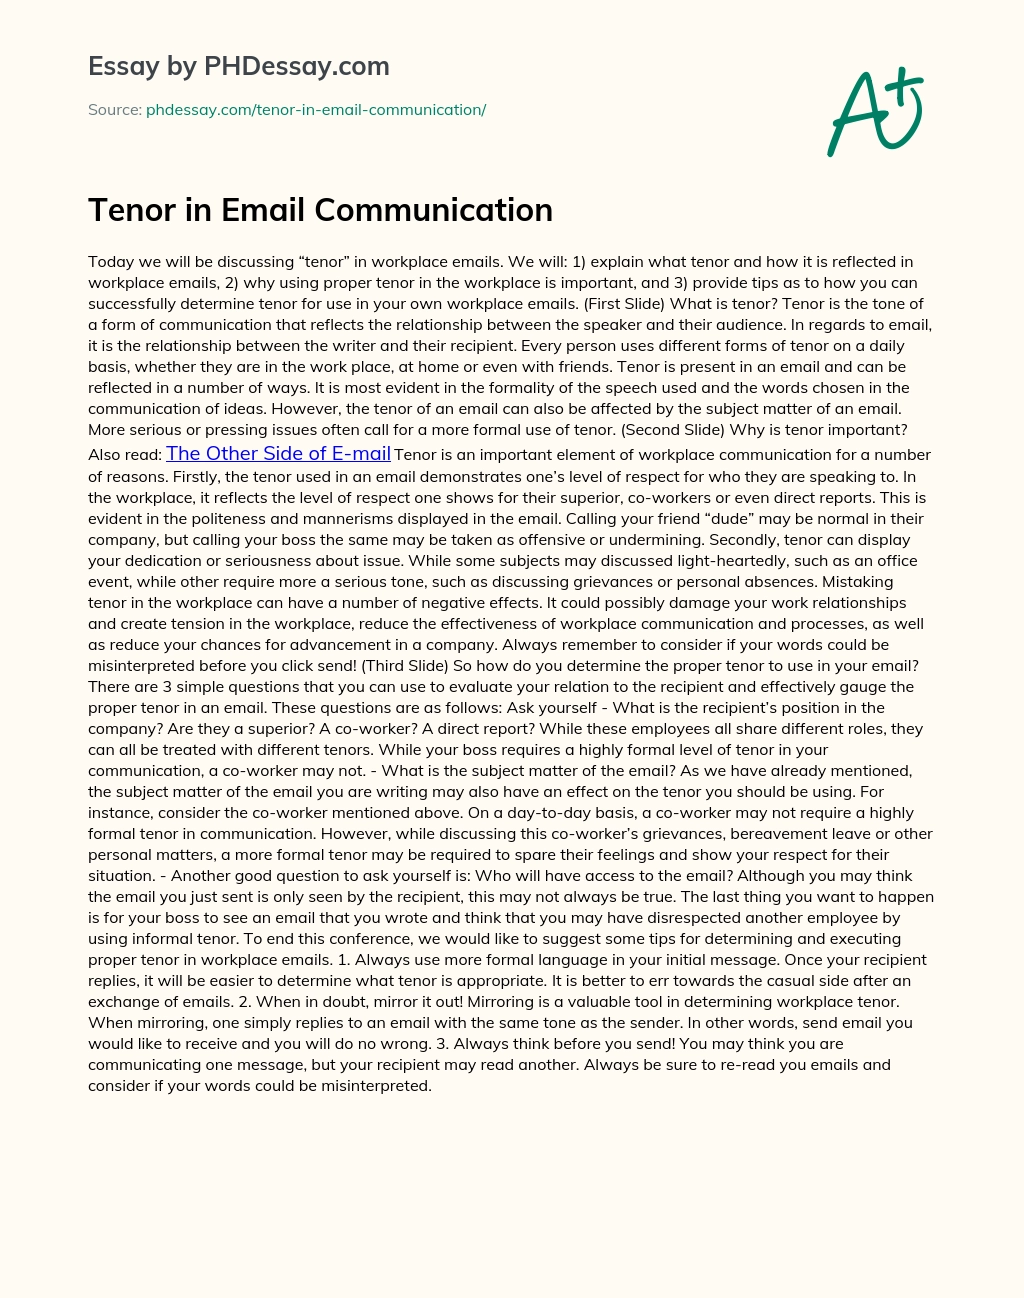 Tenor in Email Communication essay